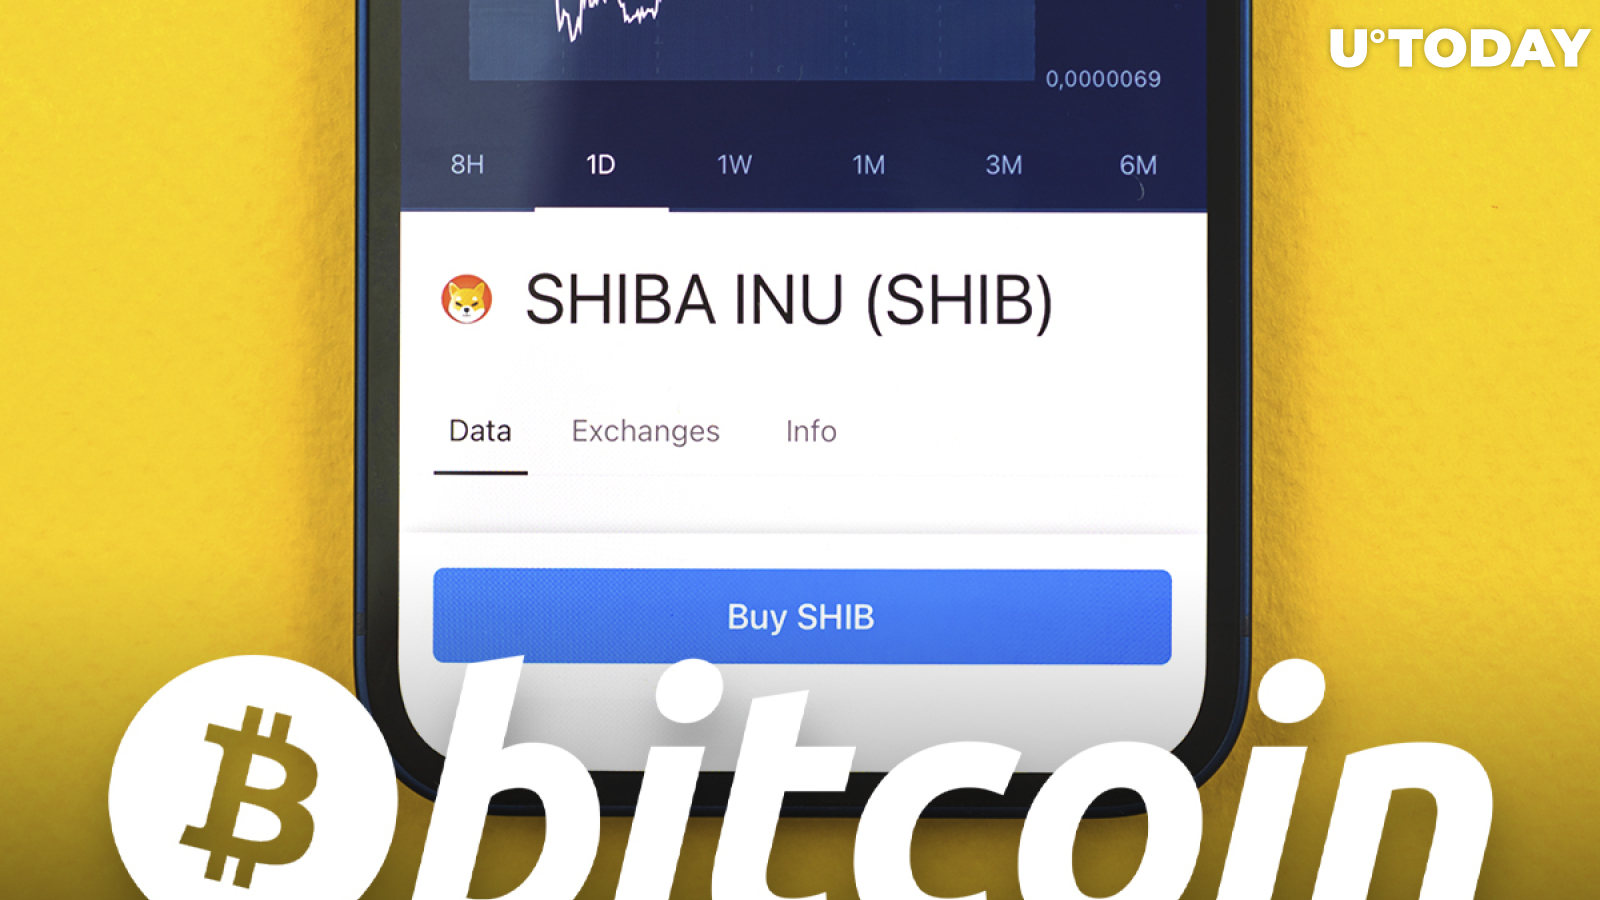 SHIB Has Brilliance in Design, But Bitcoin Is Likely to Prevail, Mike McGlone Explains Why